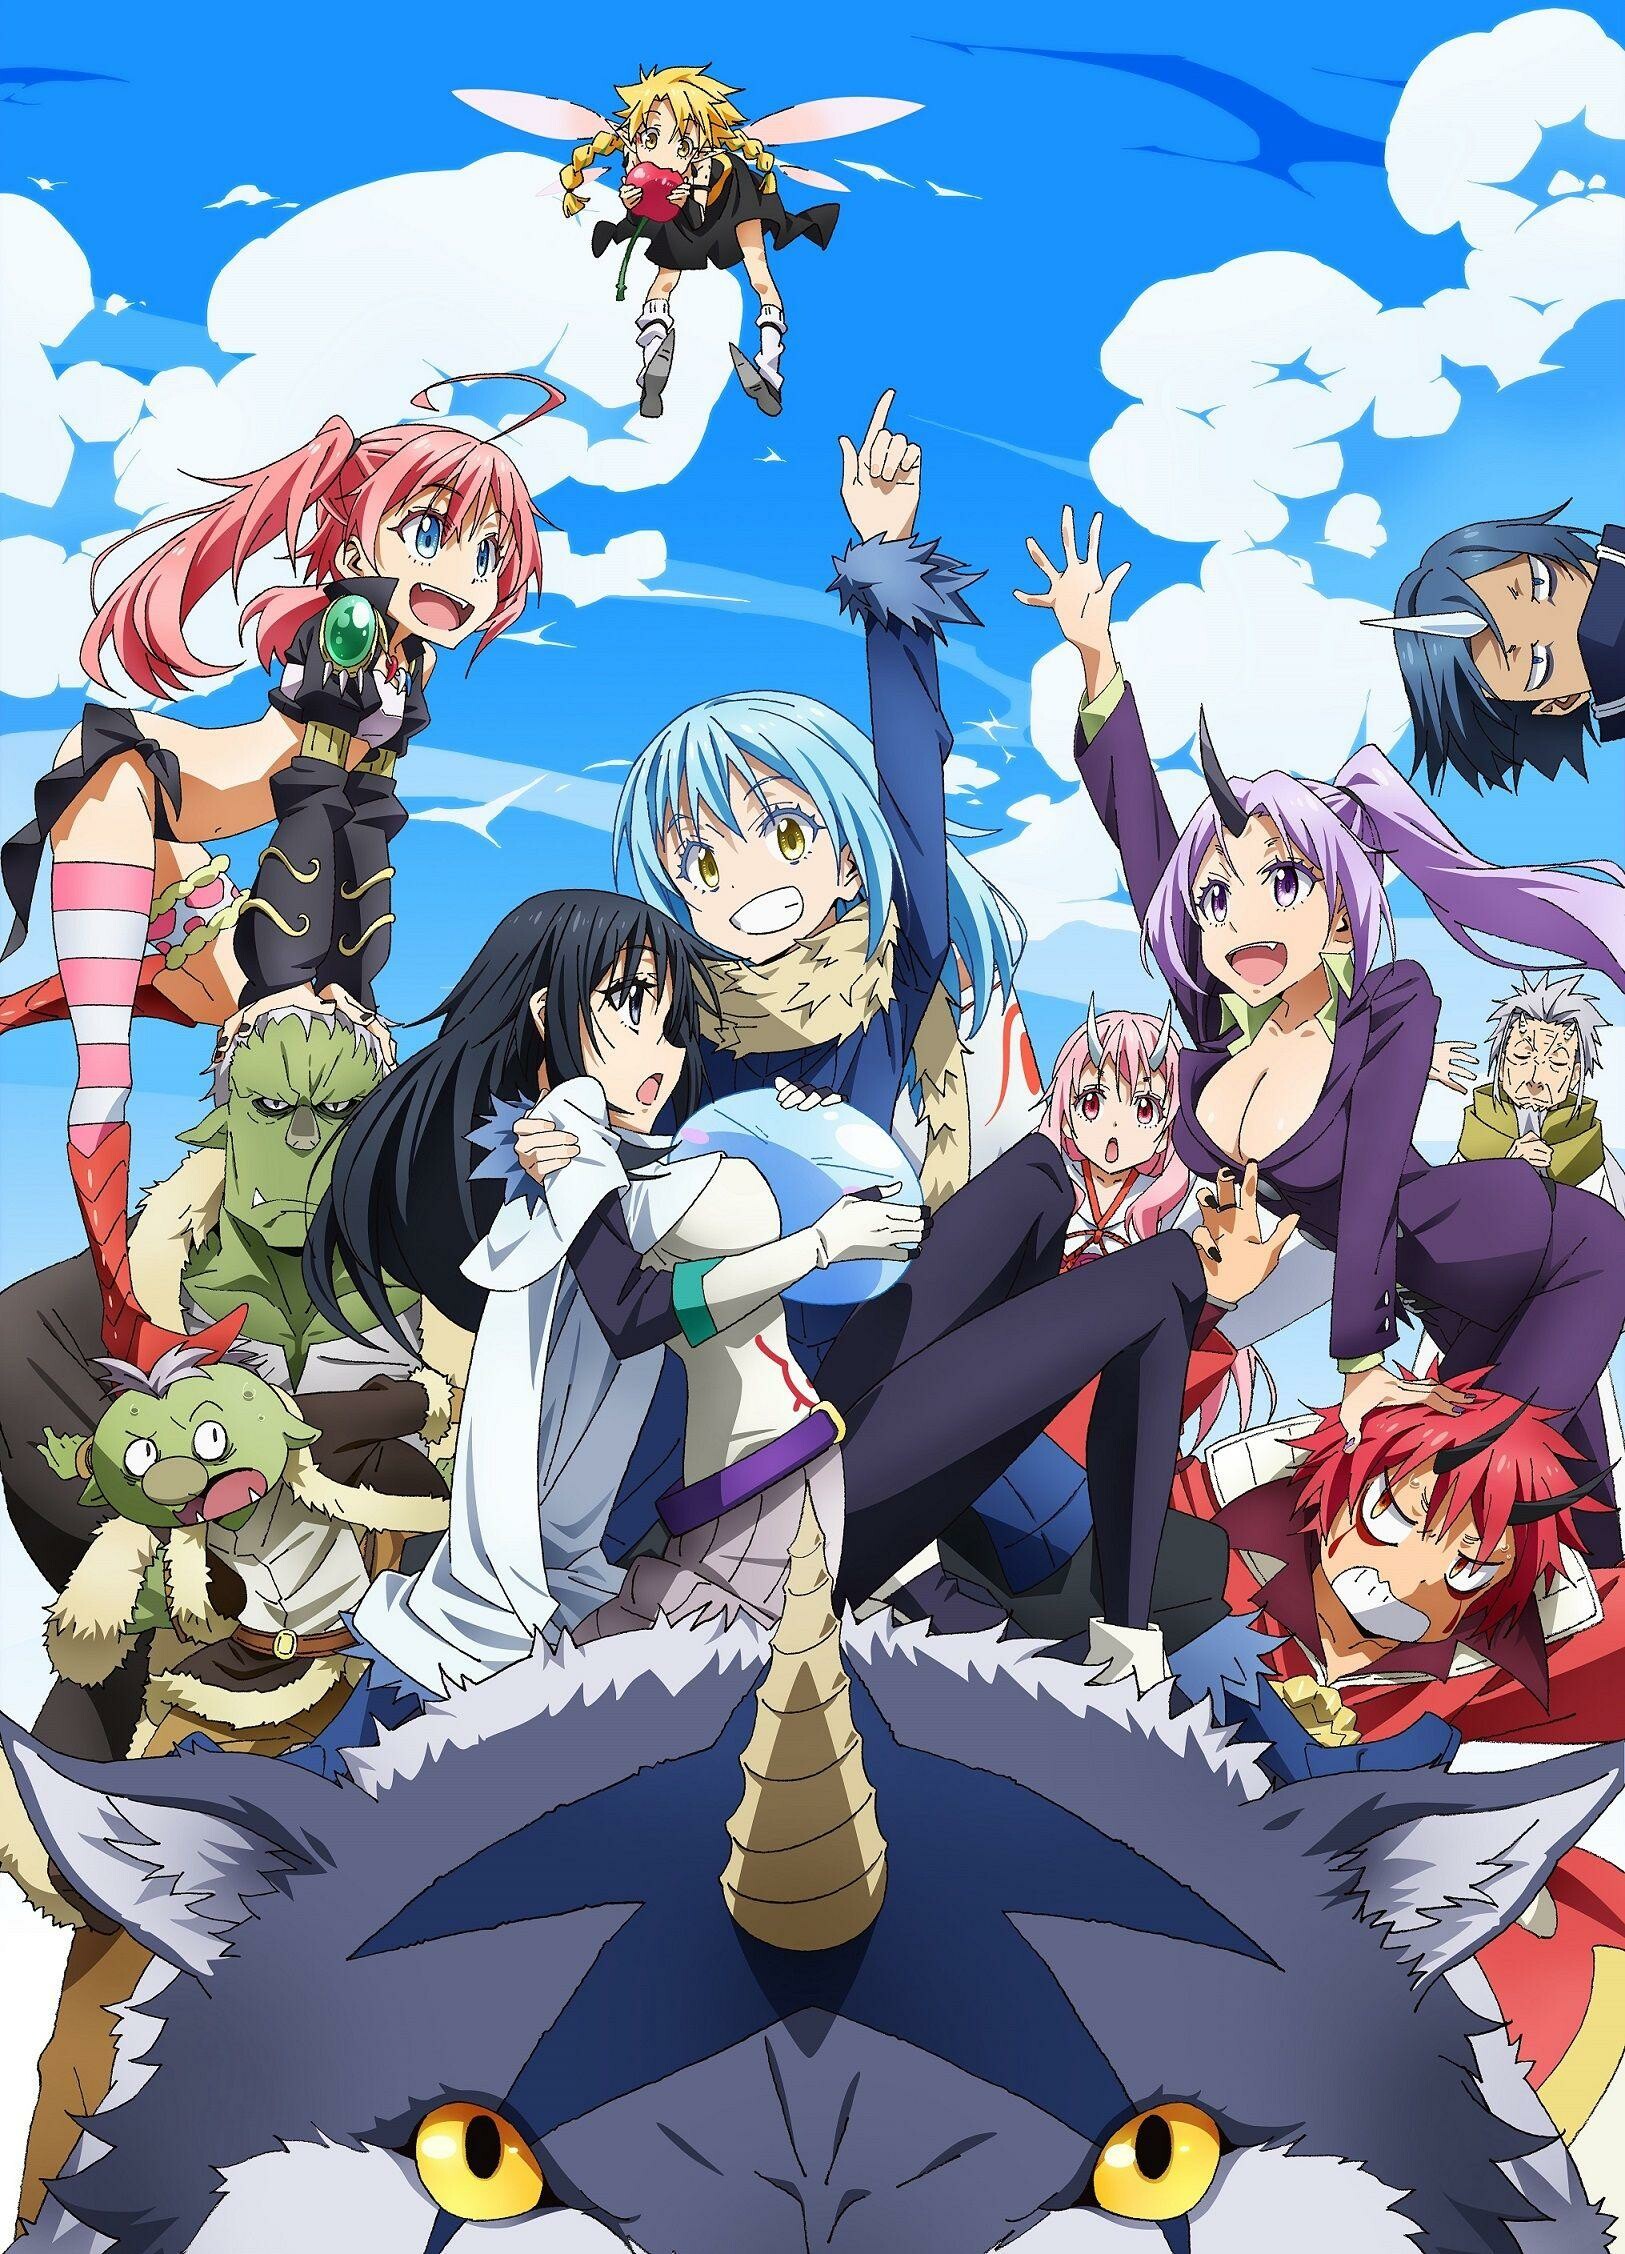 That Time I Got Reincarnated as a Slime: Isekai anime, A Japanese light novel series written by Fuse. 1630x2260 HD Wallpaper.